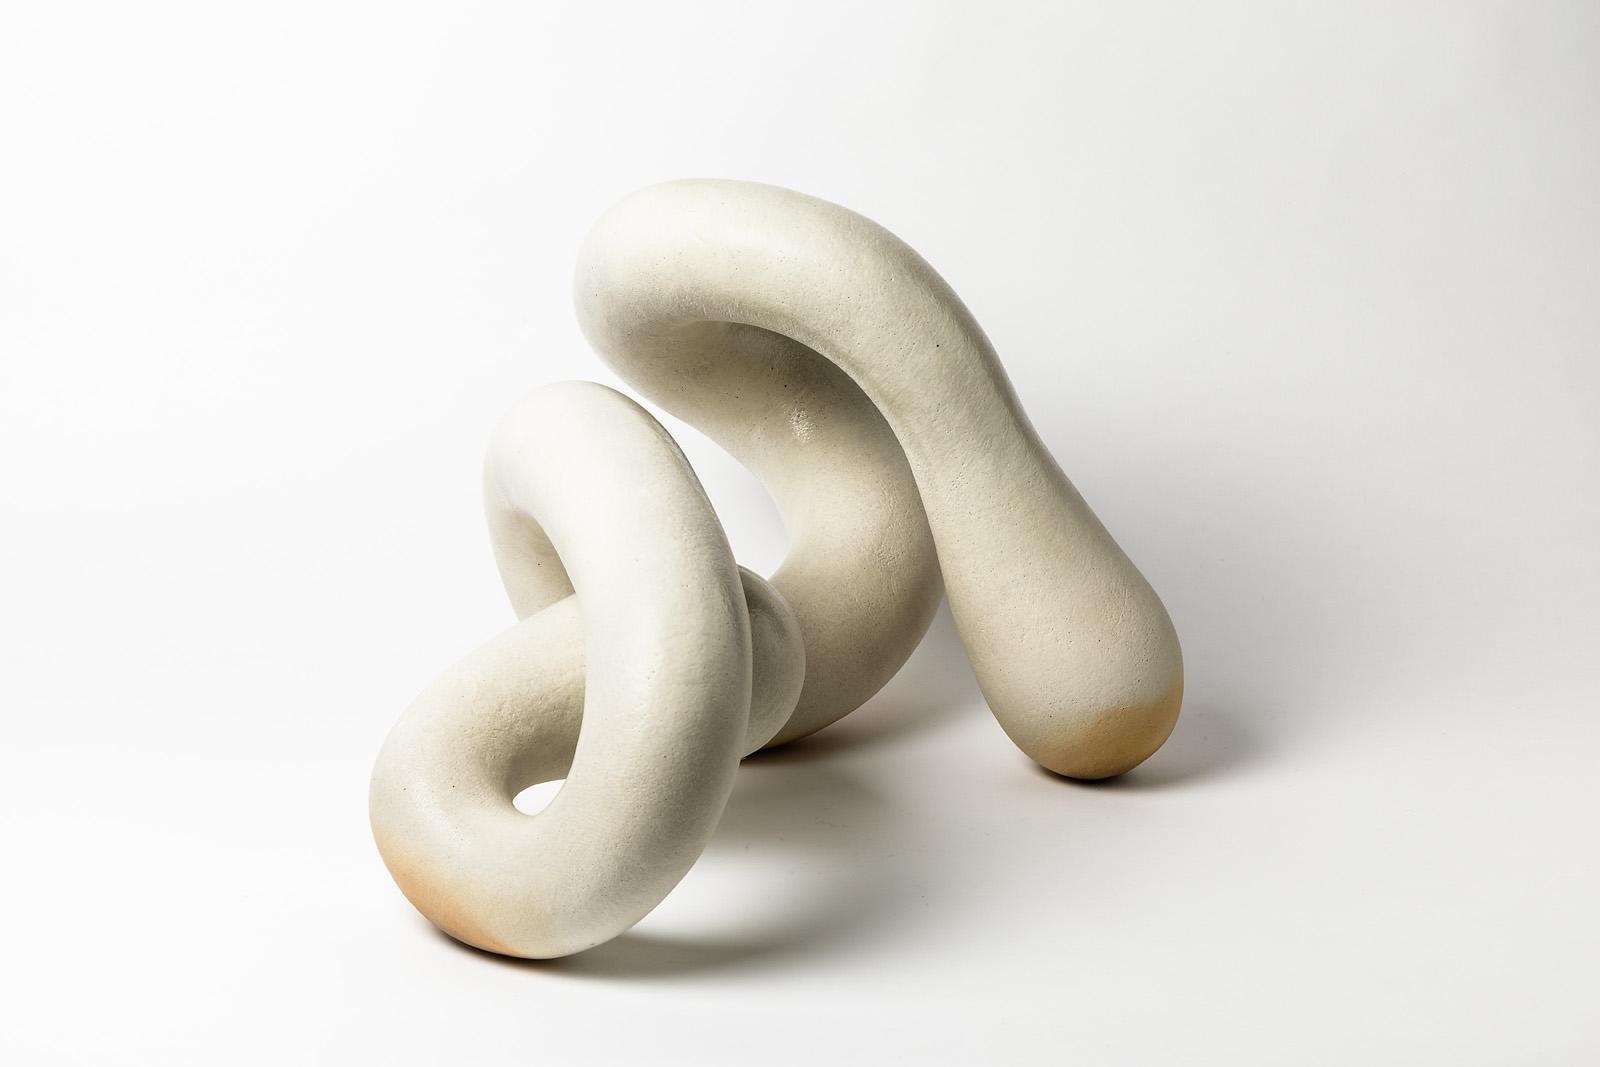 Contemporary Ceramic Sculpture by Alistair Danhieux, circa 2010